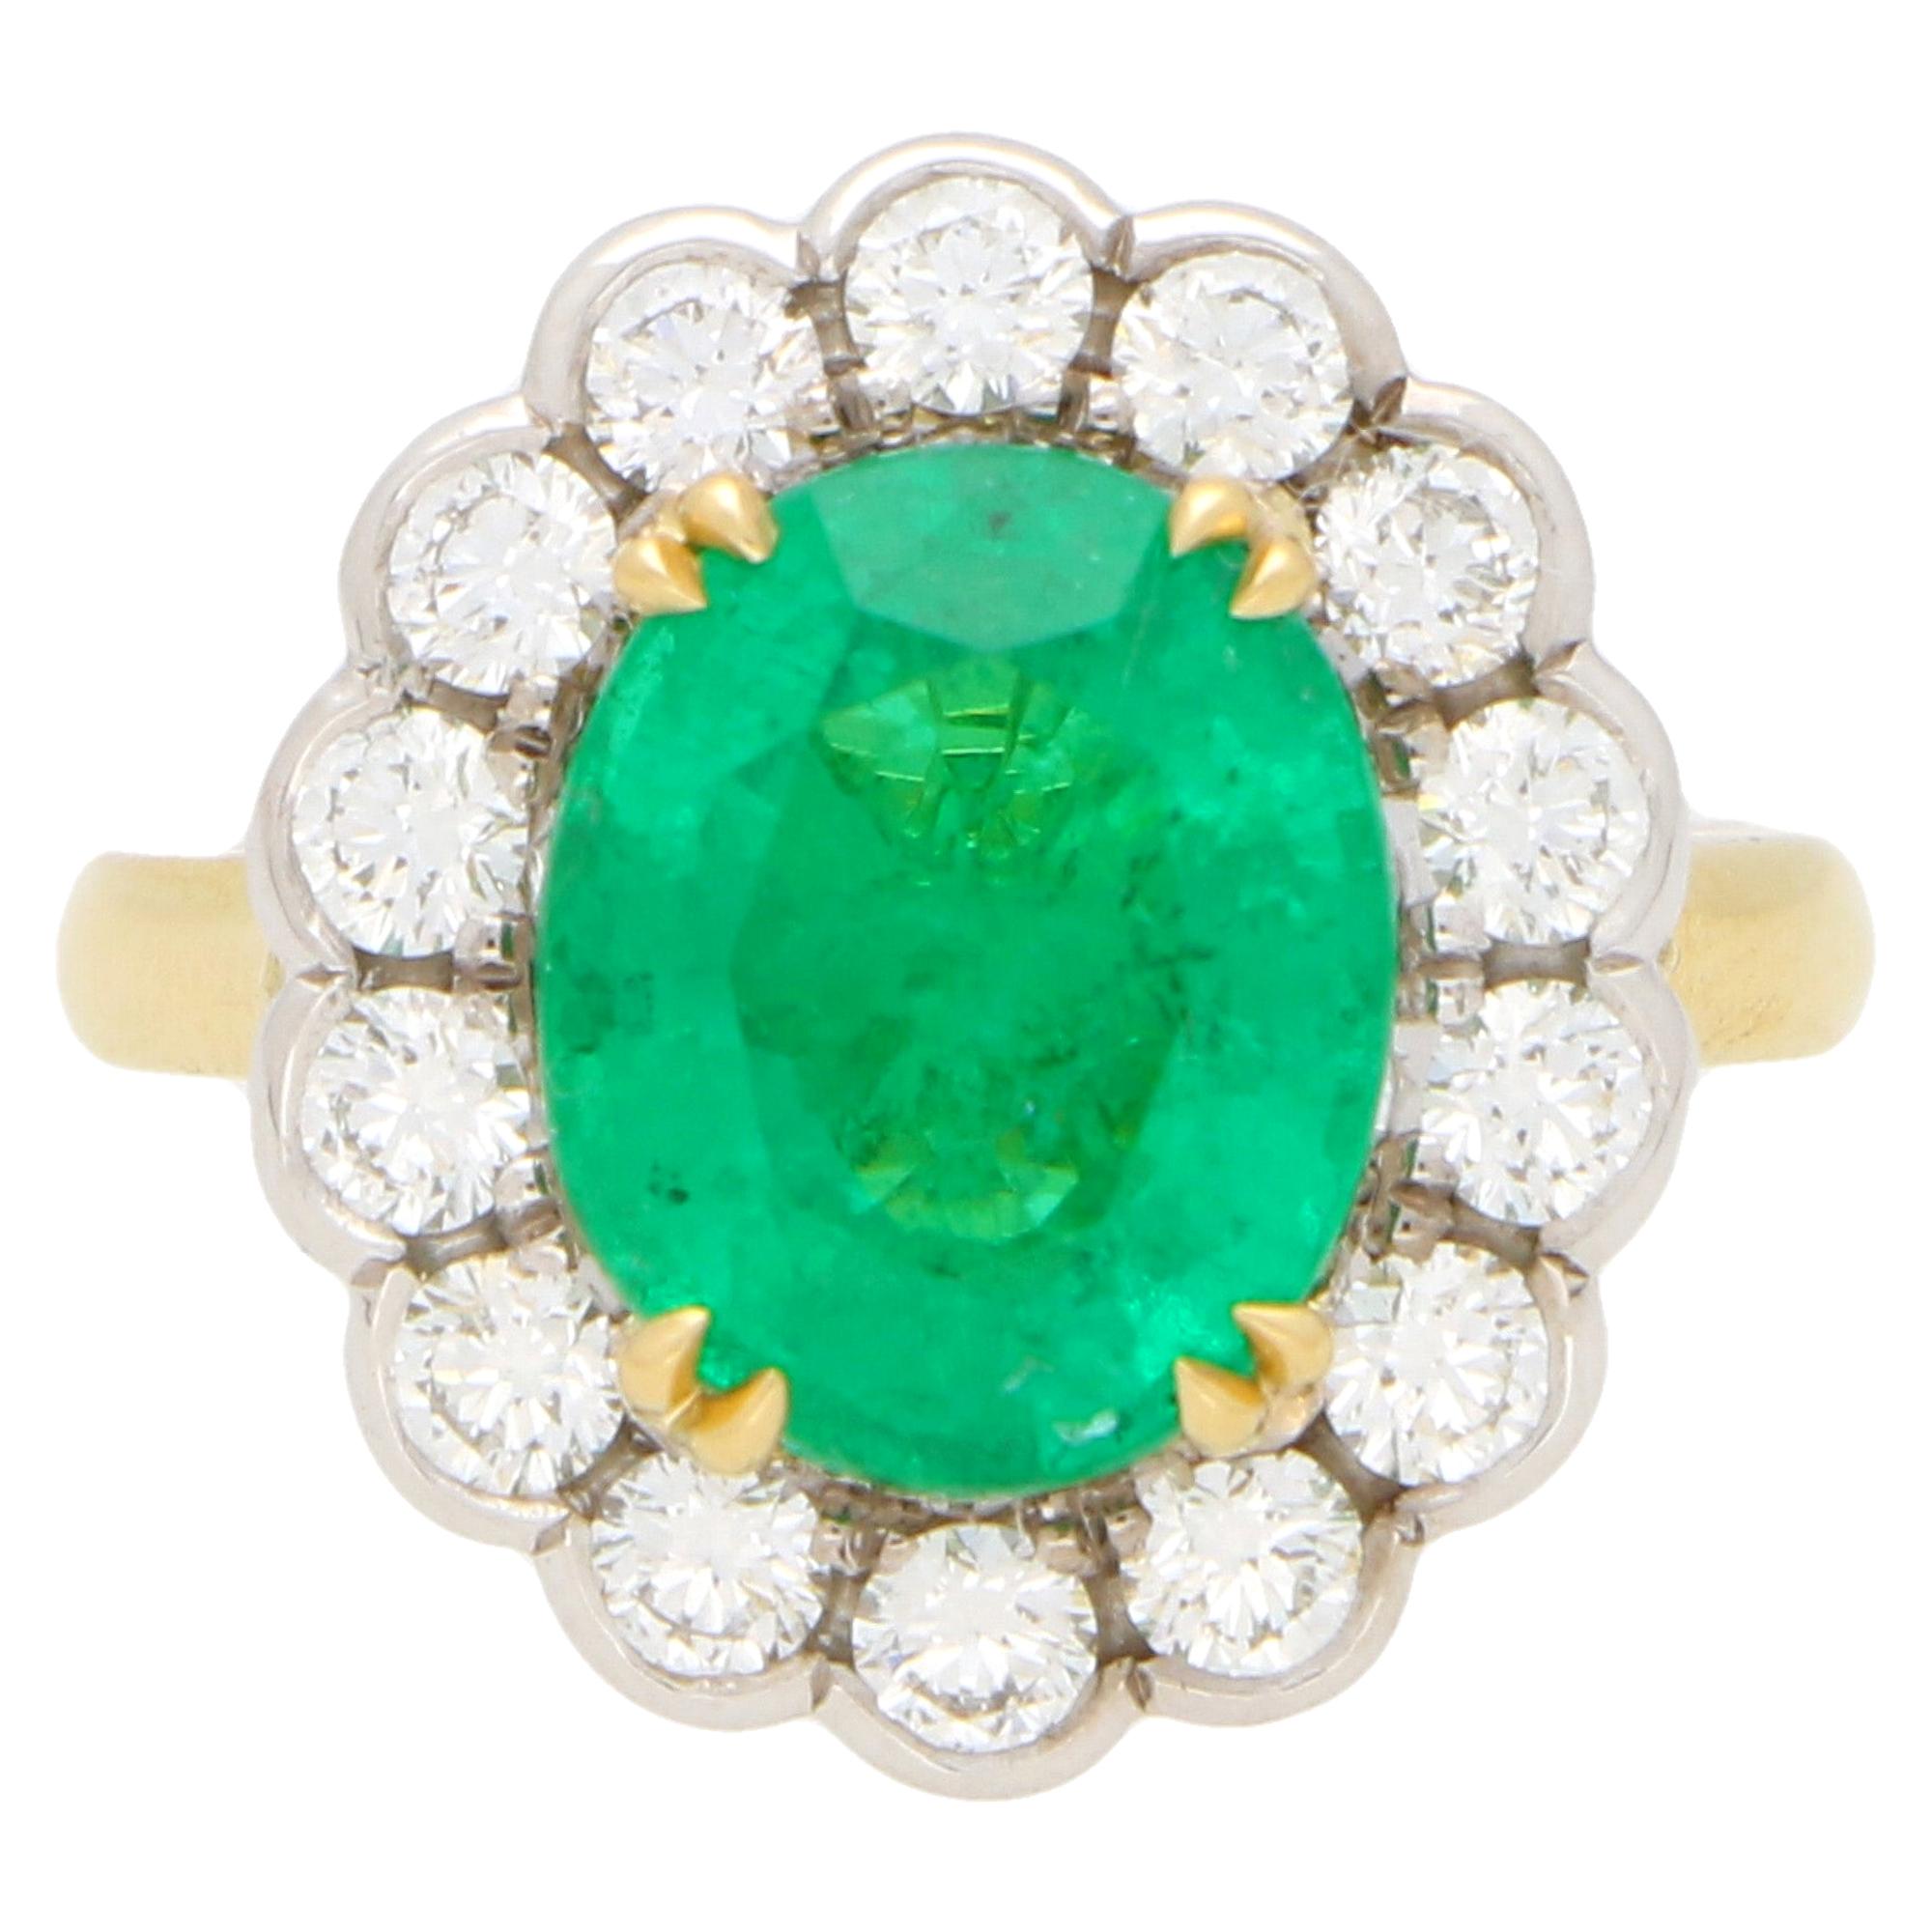 Emerald and Diamond Cluster Ring Set in 18 Karat Yellow and White Gold